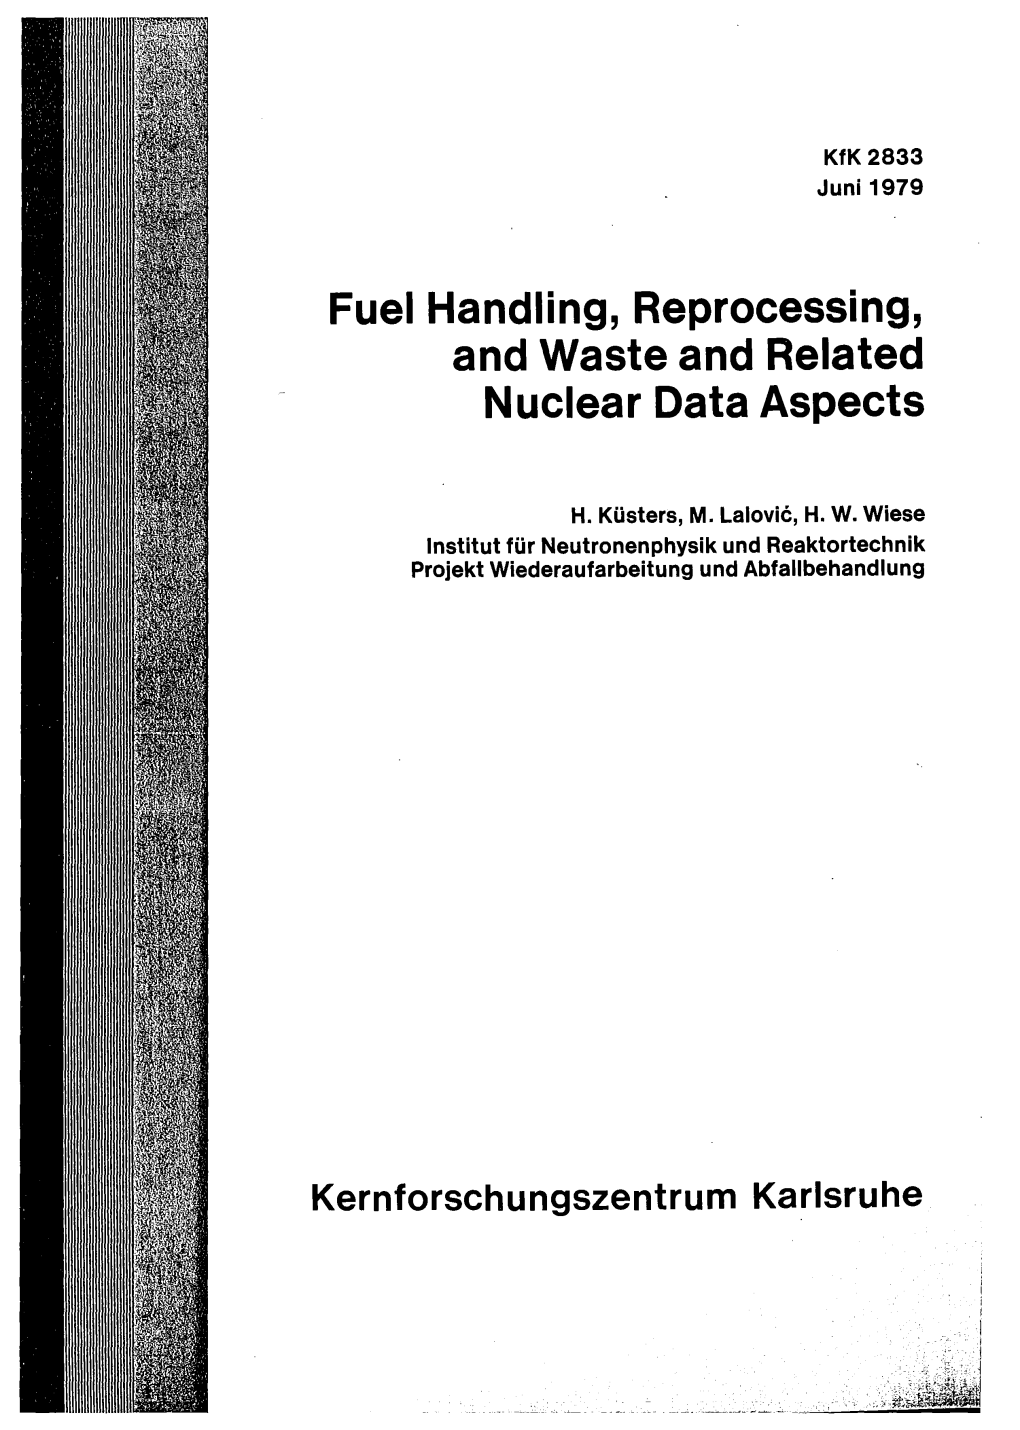 Fuel Handling, Reprocessing, and Waste and Related Nuclear Data Aspects